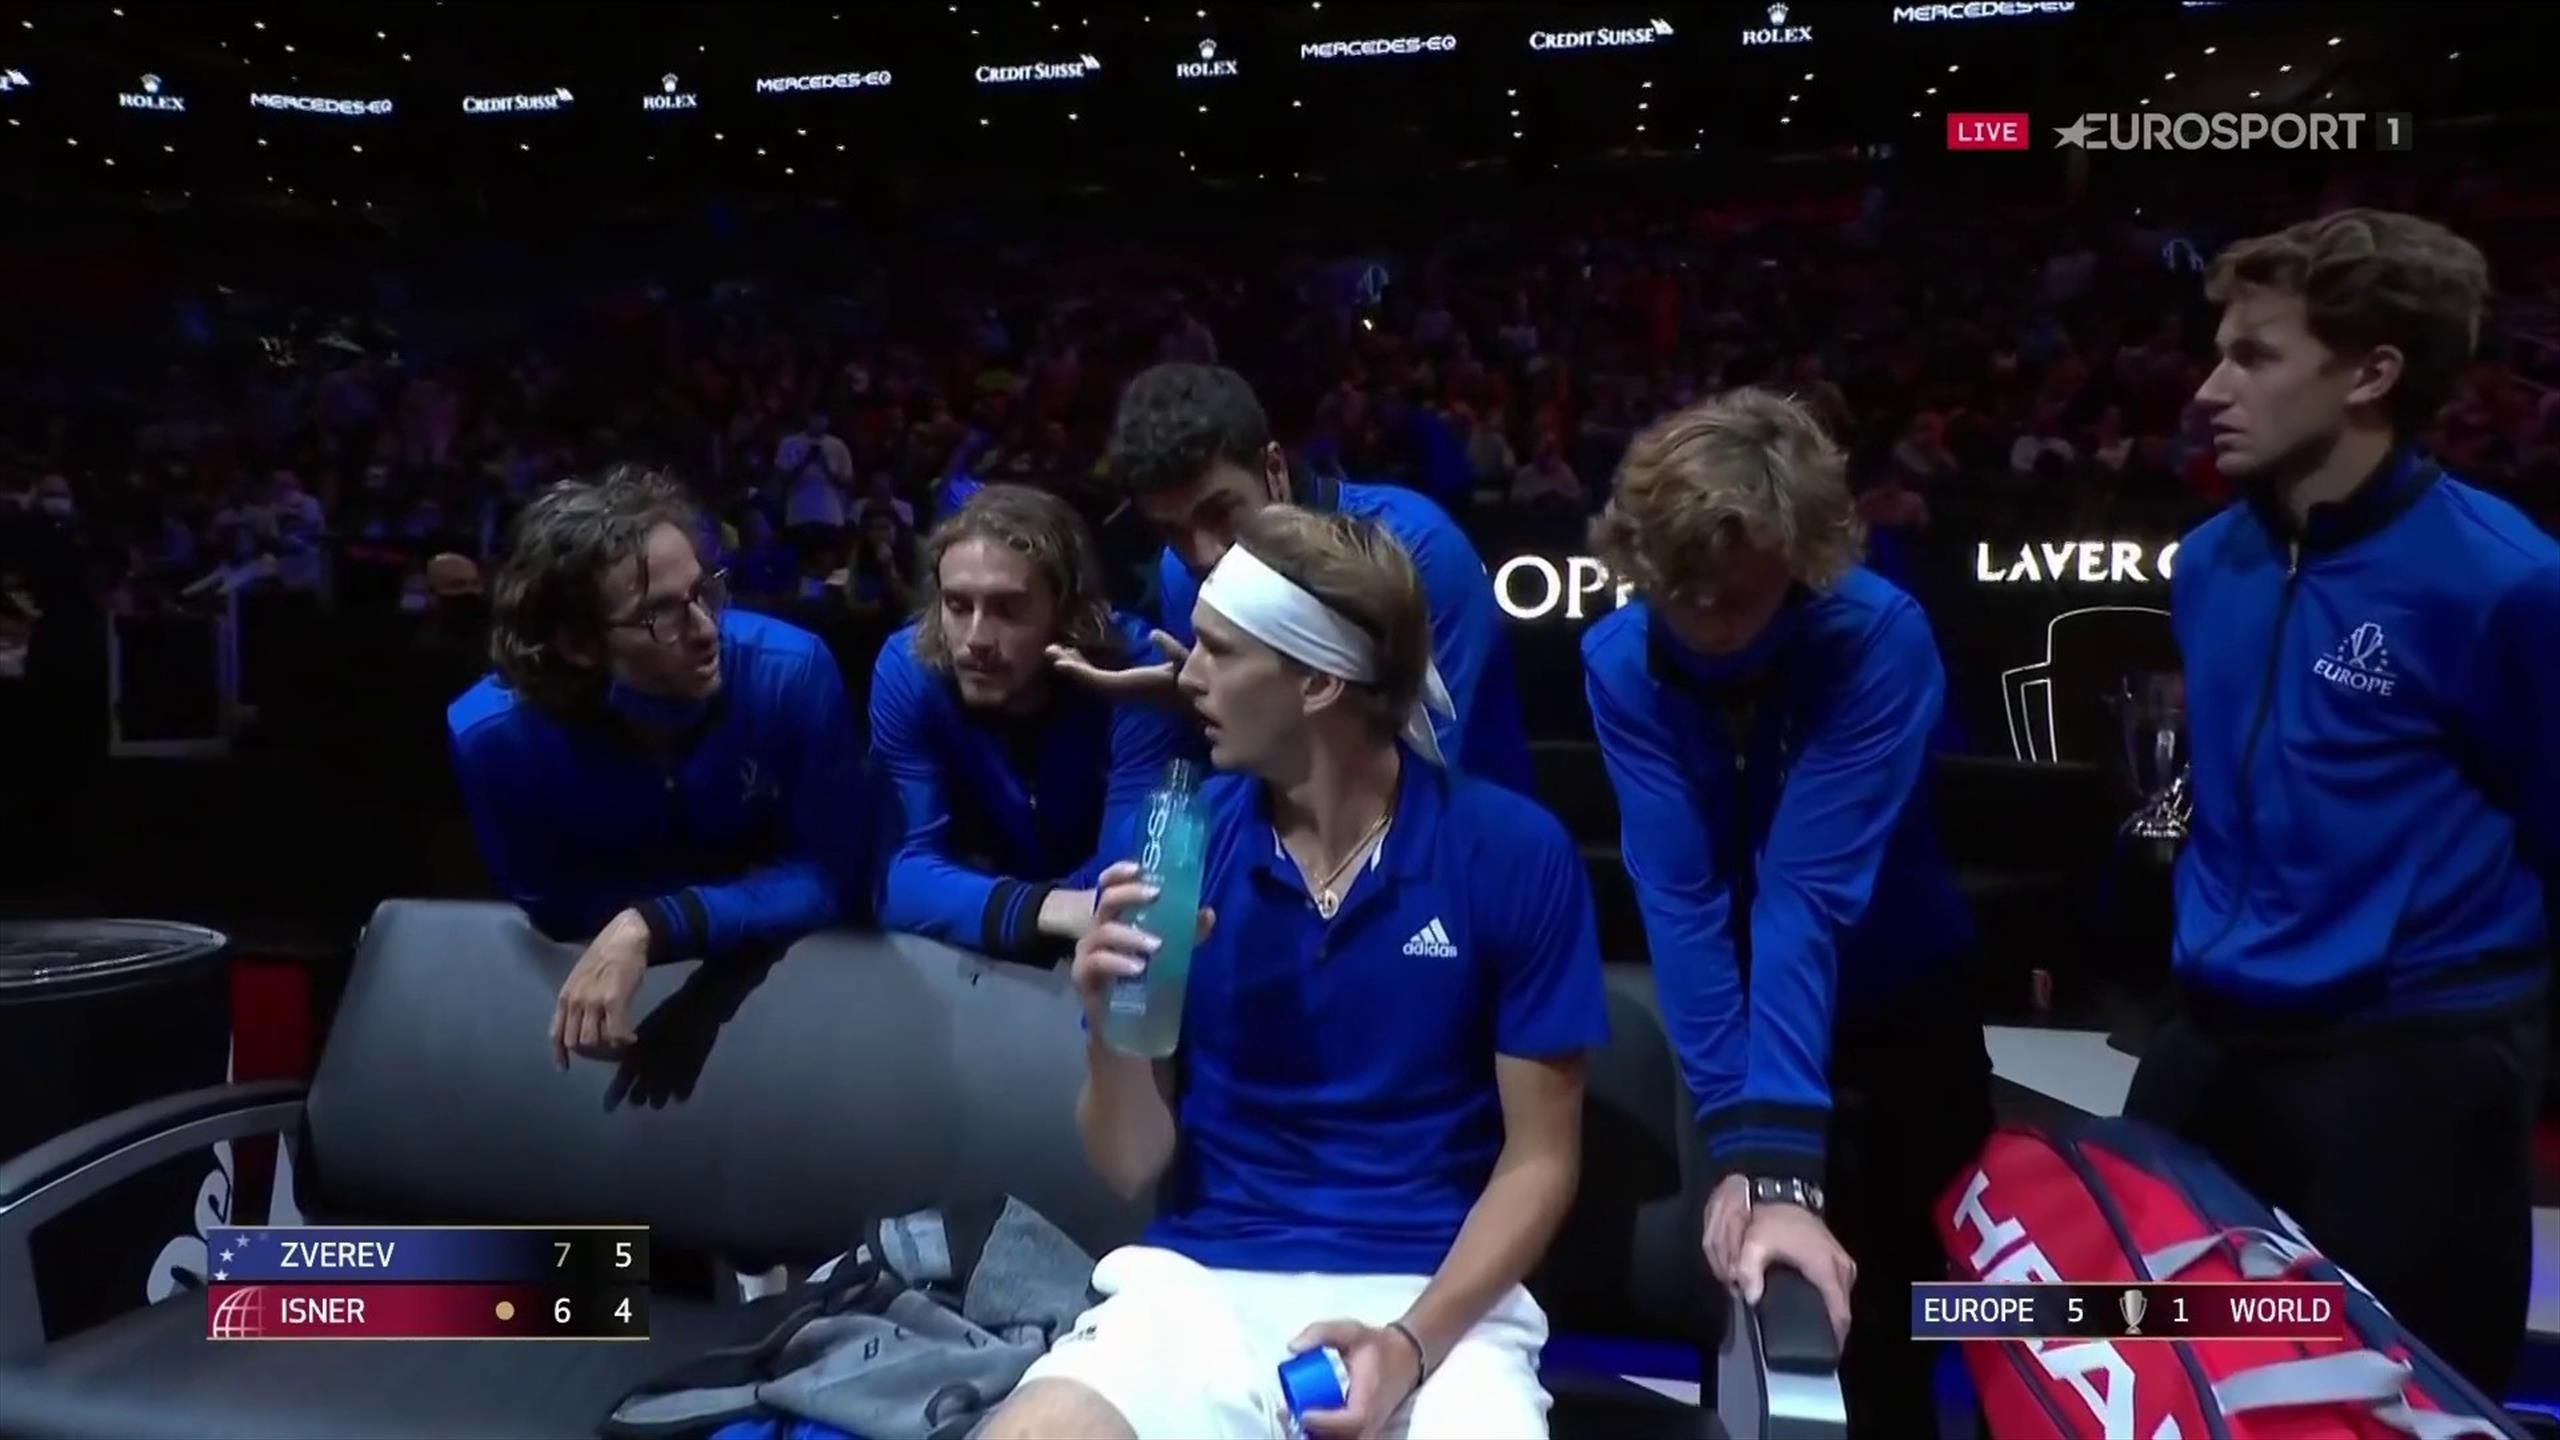 Laver Cup 2021 - Its a team huddle! - Team Europe take coaching to next level with Alexander Zverev - Tennis video